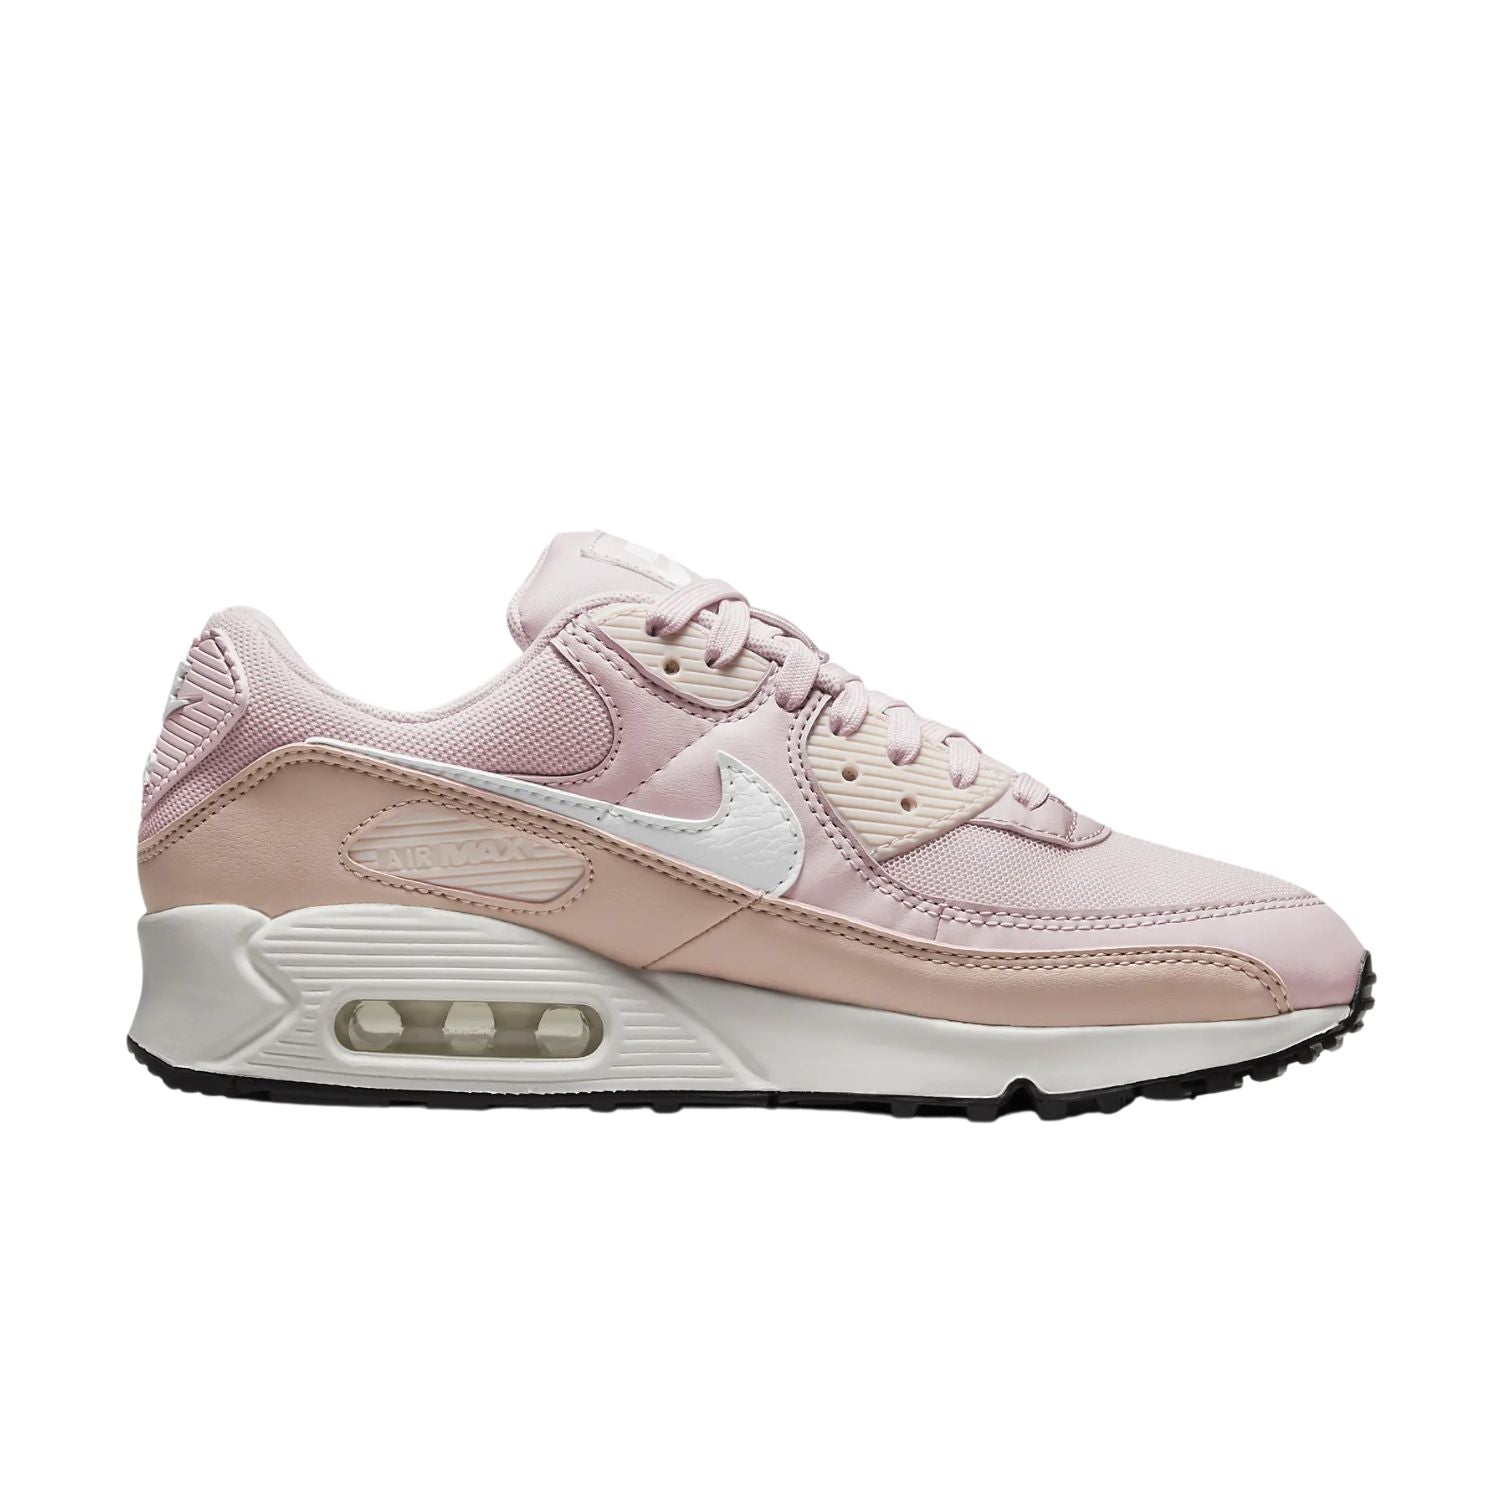 Nike Air Max 90 Barely Rose Pink Oxford Black (Women's)